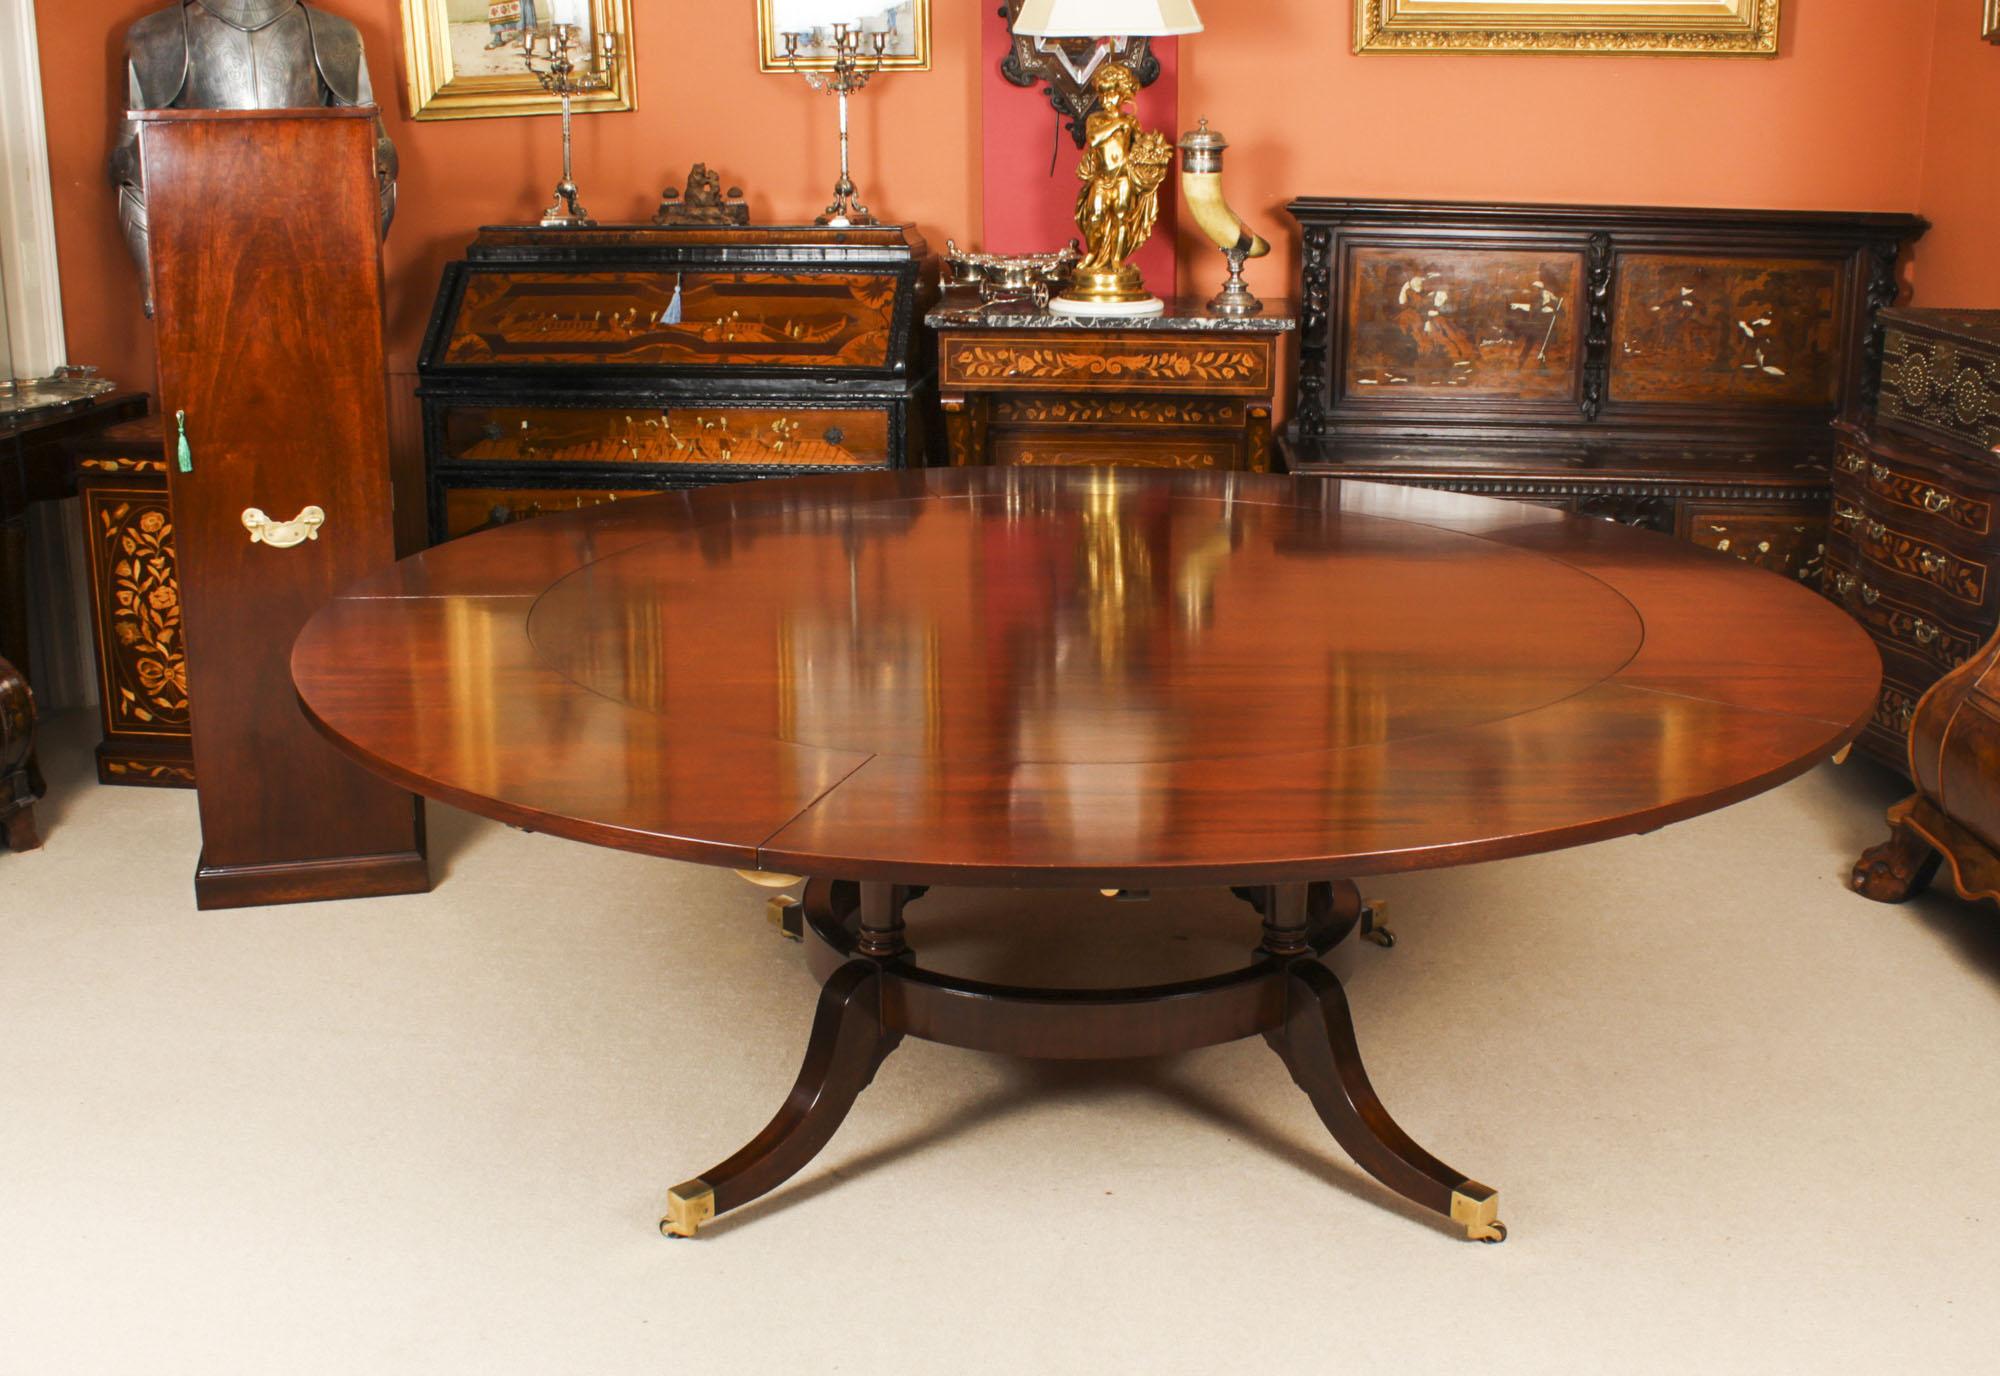 This is a beautiful Regency Revival dining set comprising a Jupe style dining table and leaf holder by Arthur Brett, and a set of eight Gondola dining chairs, mid 20th century in date.

The table has a solid mahogany top with five peripheral leaves